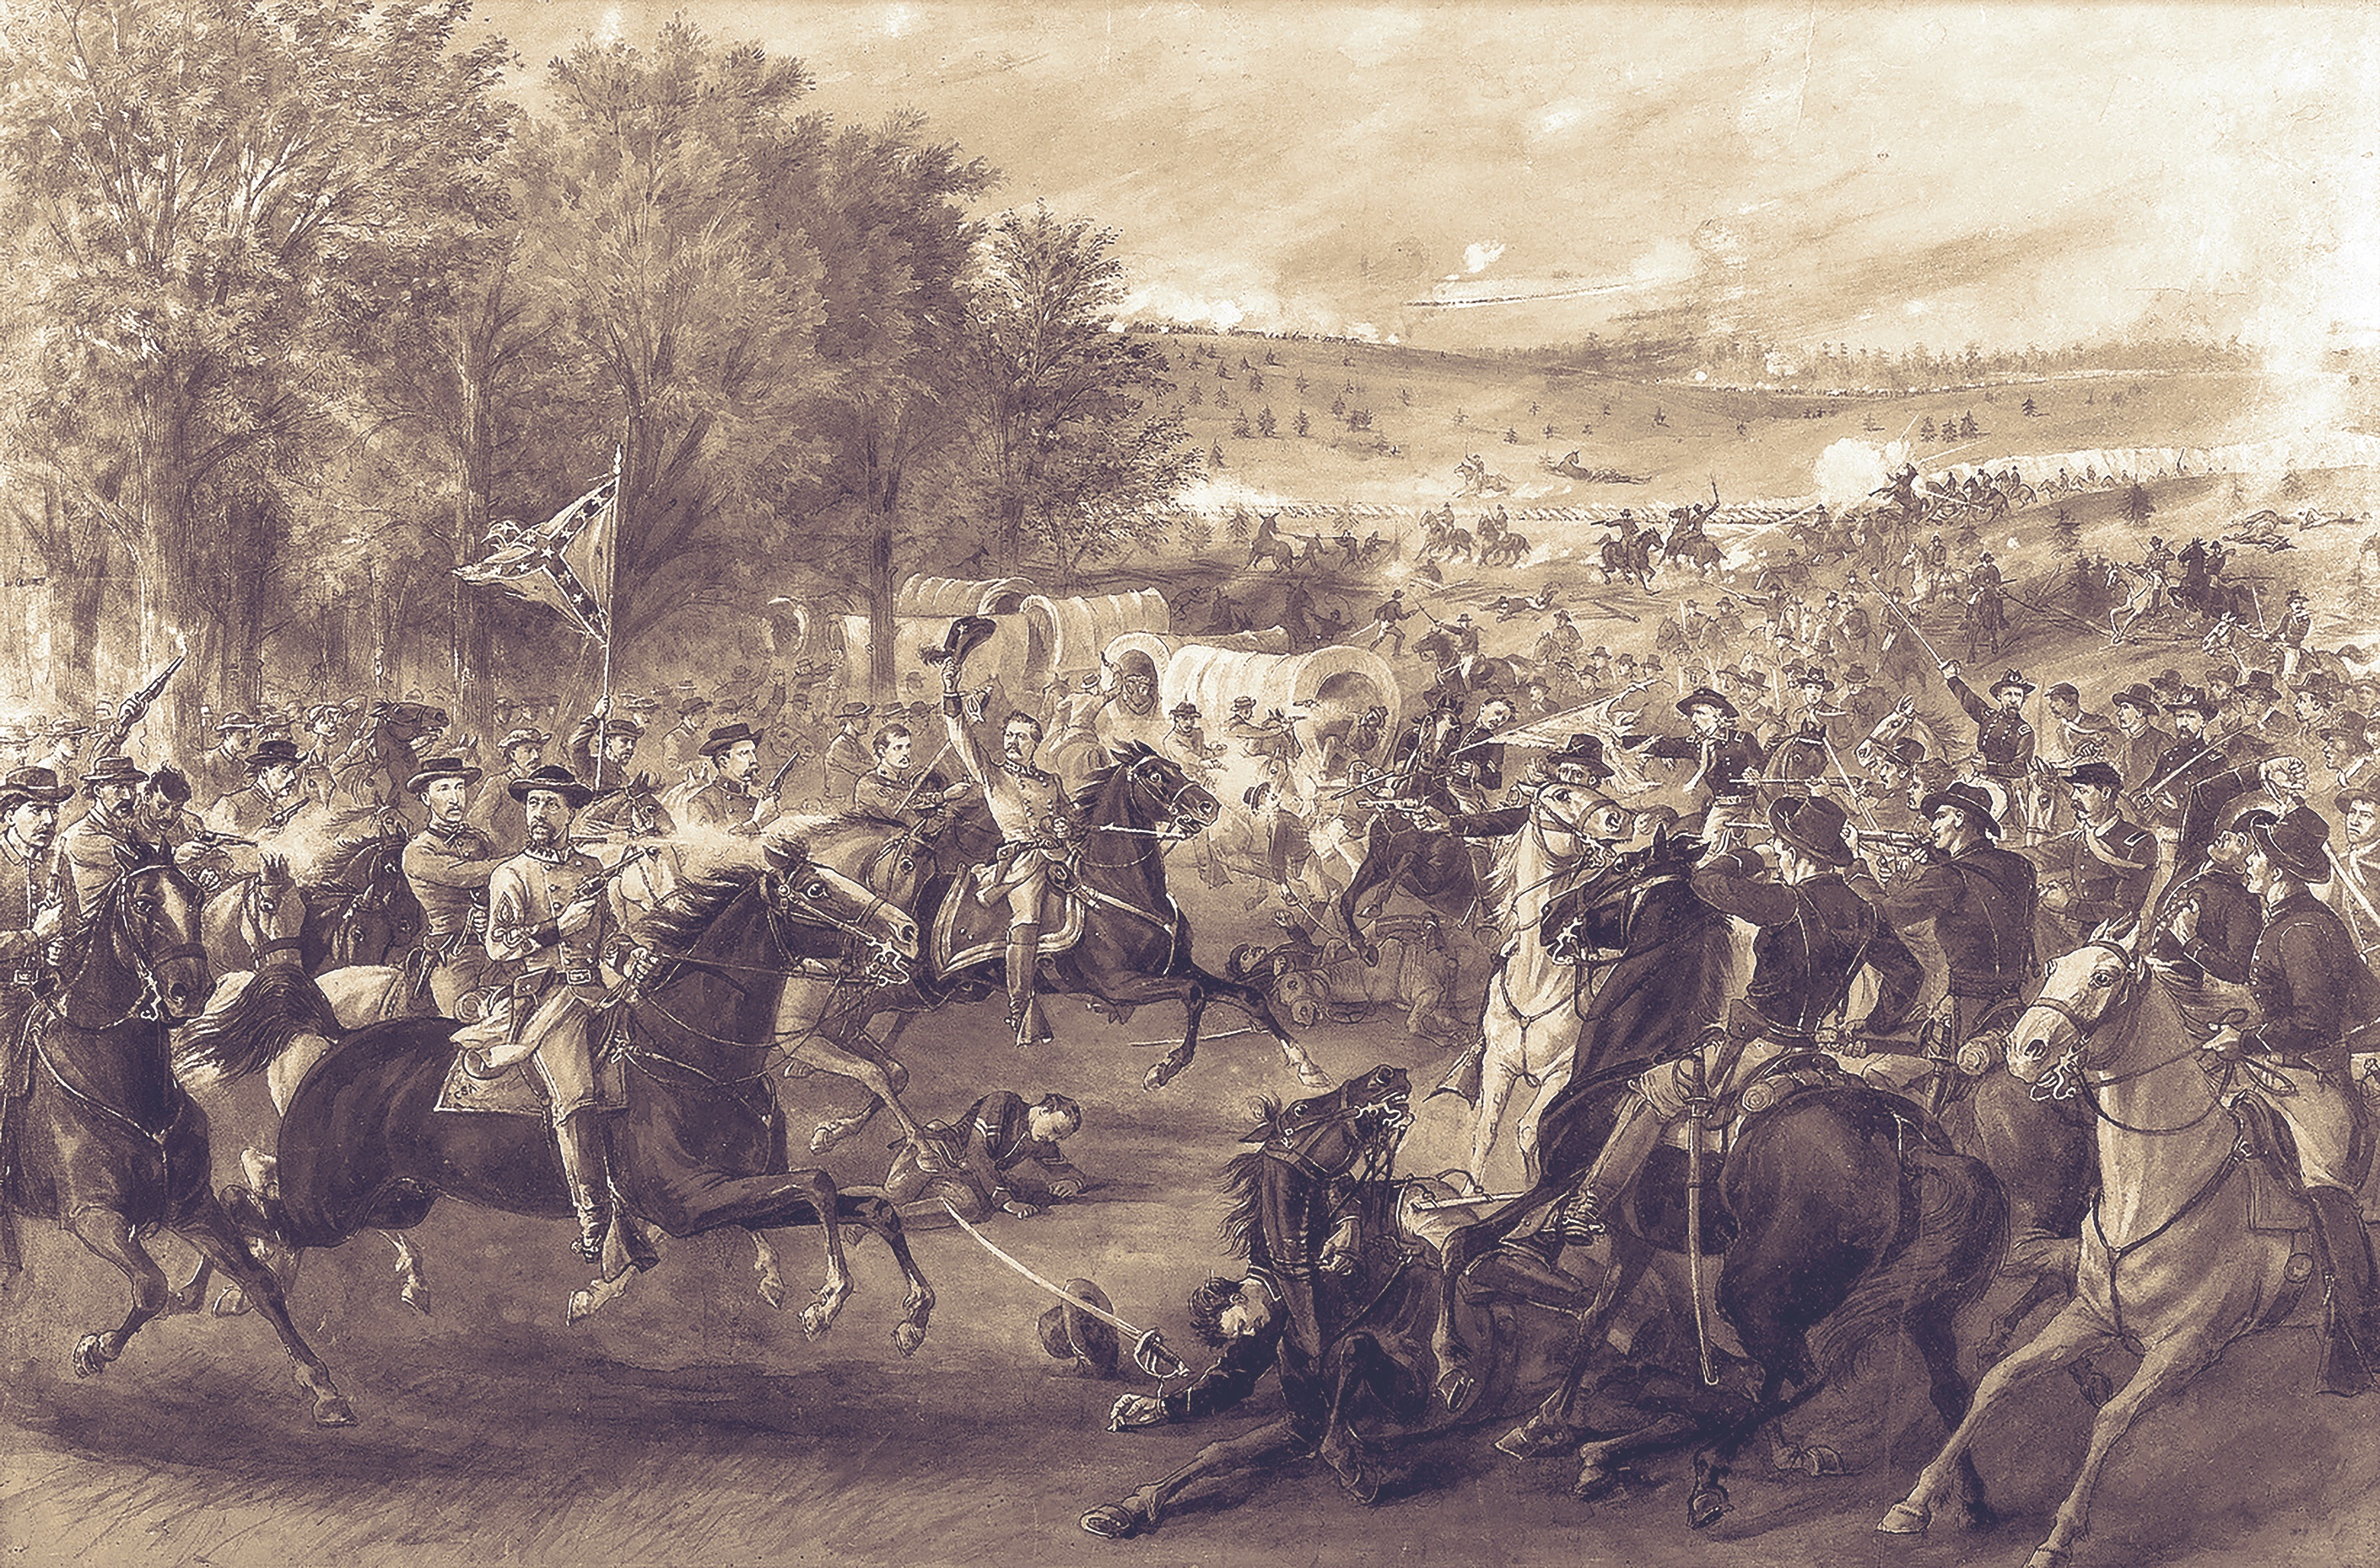 Thomas L. Rosser and his famous “Laurel Brigade” attack Union forces under George Armstrong Custer on June 11. The two brigadier generals had been friends at West Point. (Case Antiques)